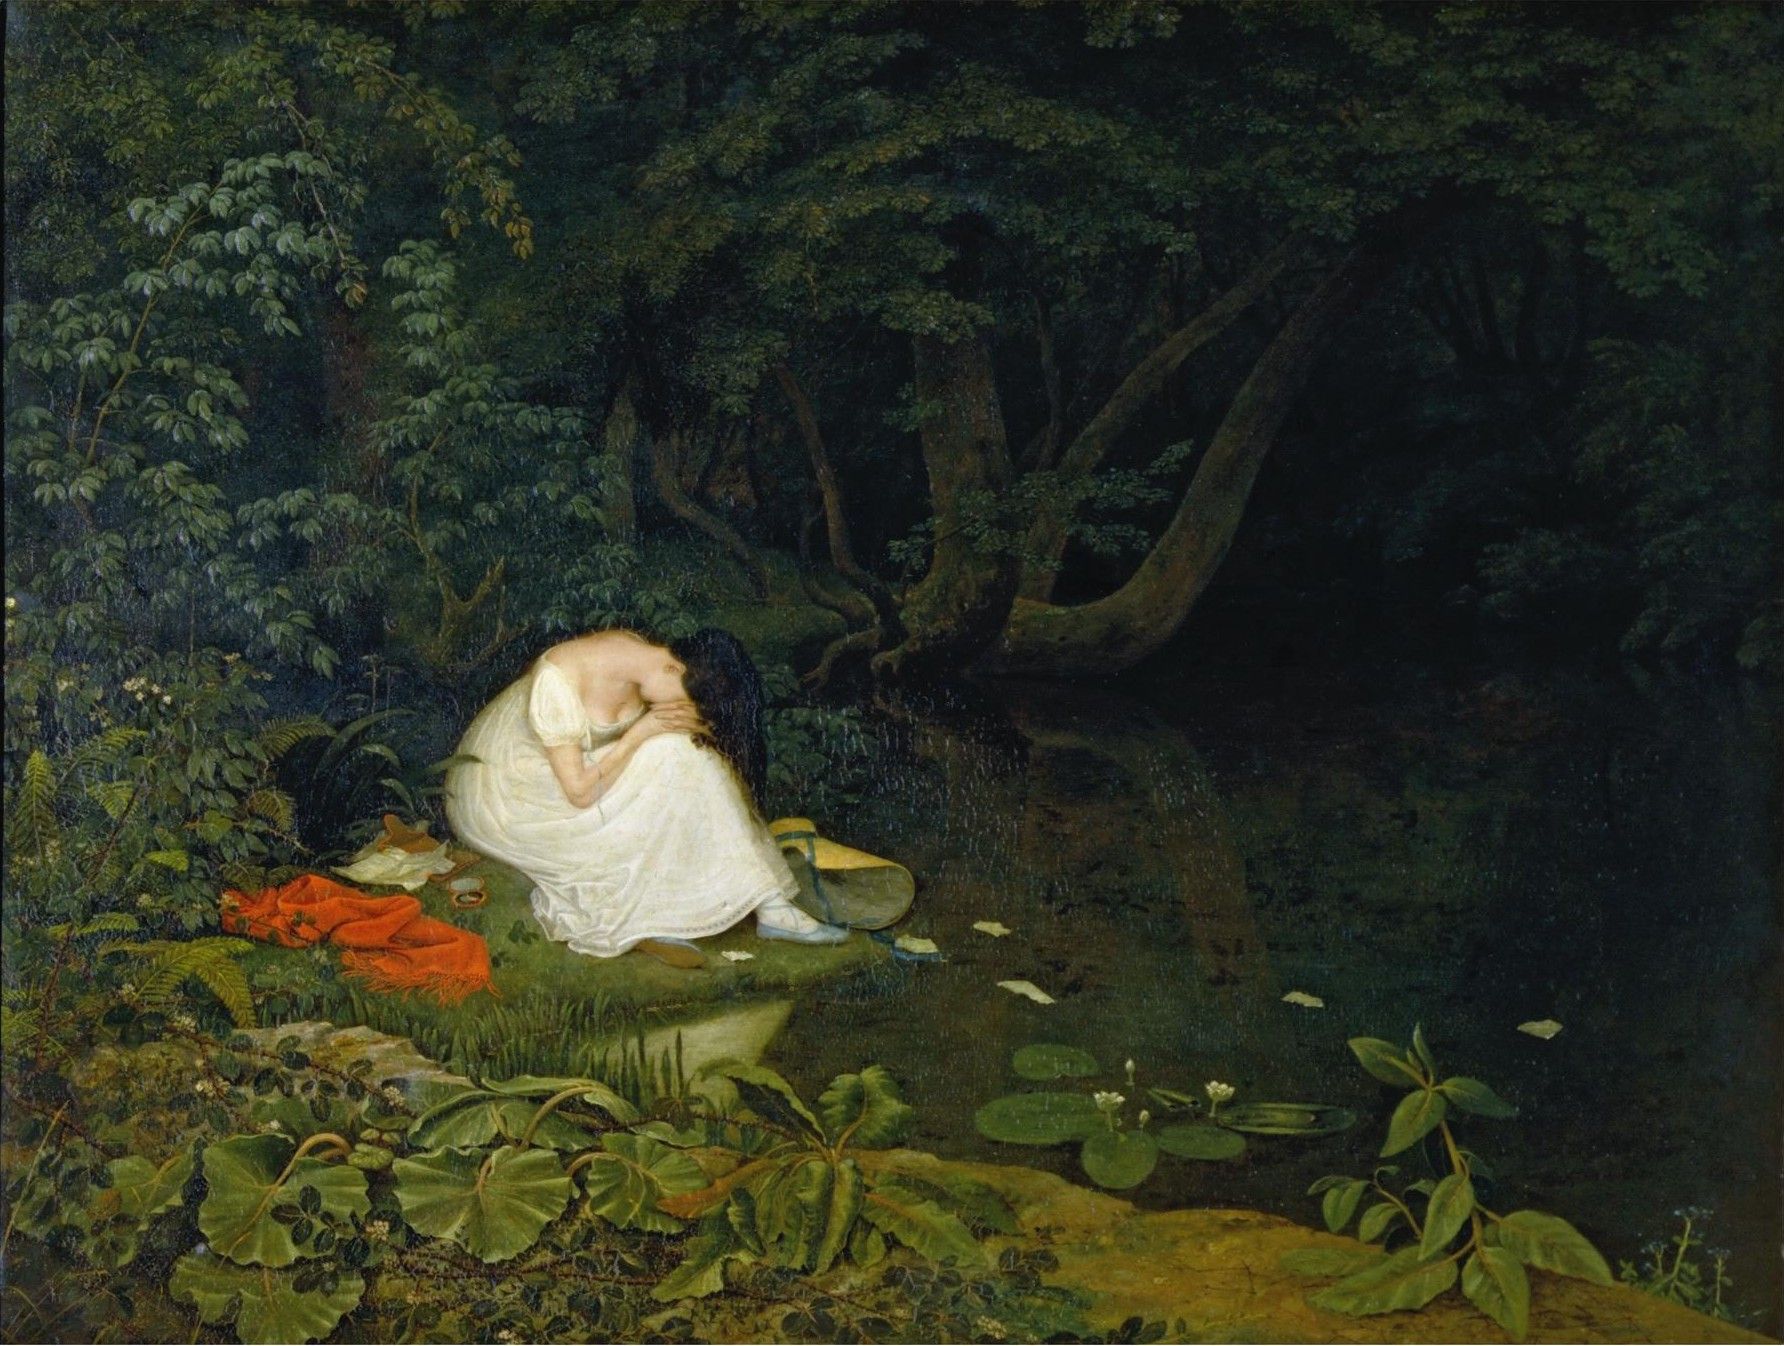 Disappointed Love by Francis Danby - 1821 - 62.8 x 81.2 cm Victoria and Albert Museum